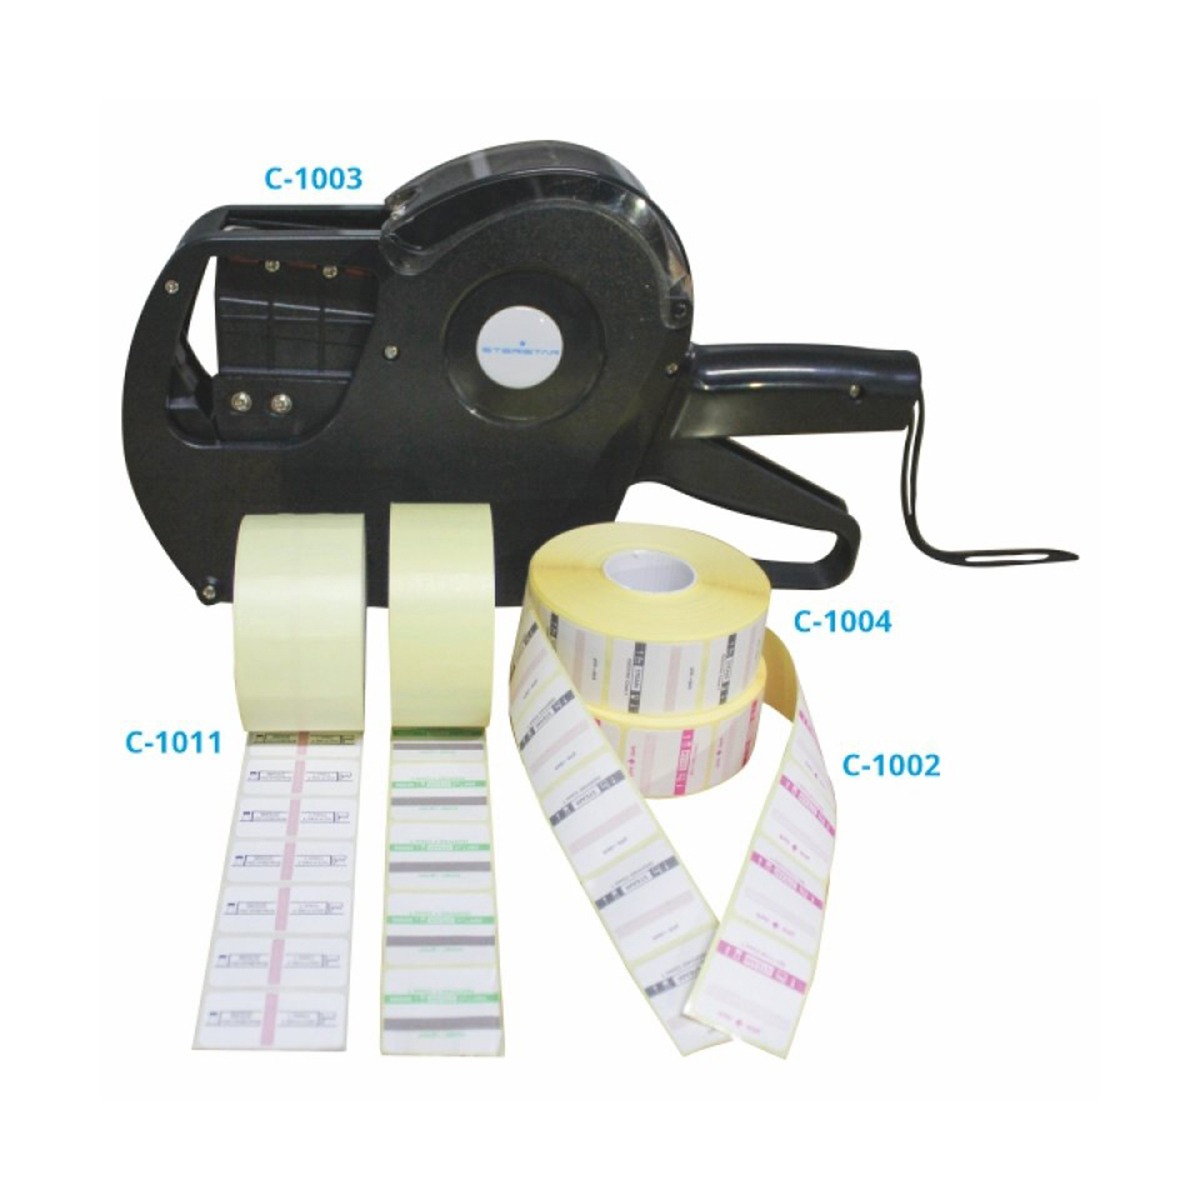 Self Adhesive Documentation Label and Labeler 002